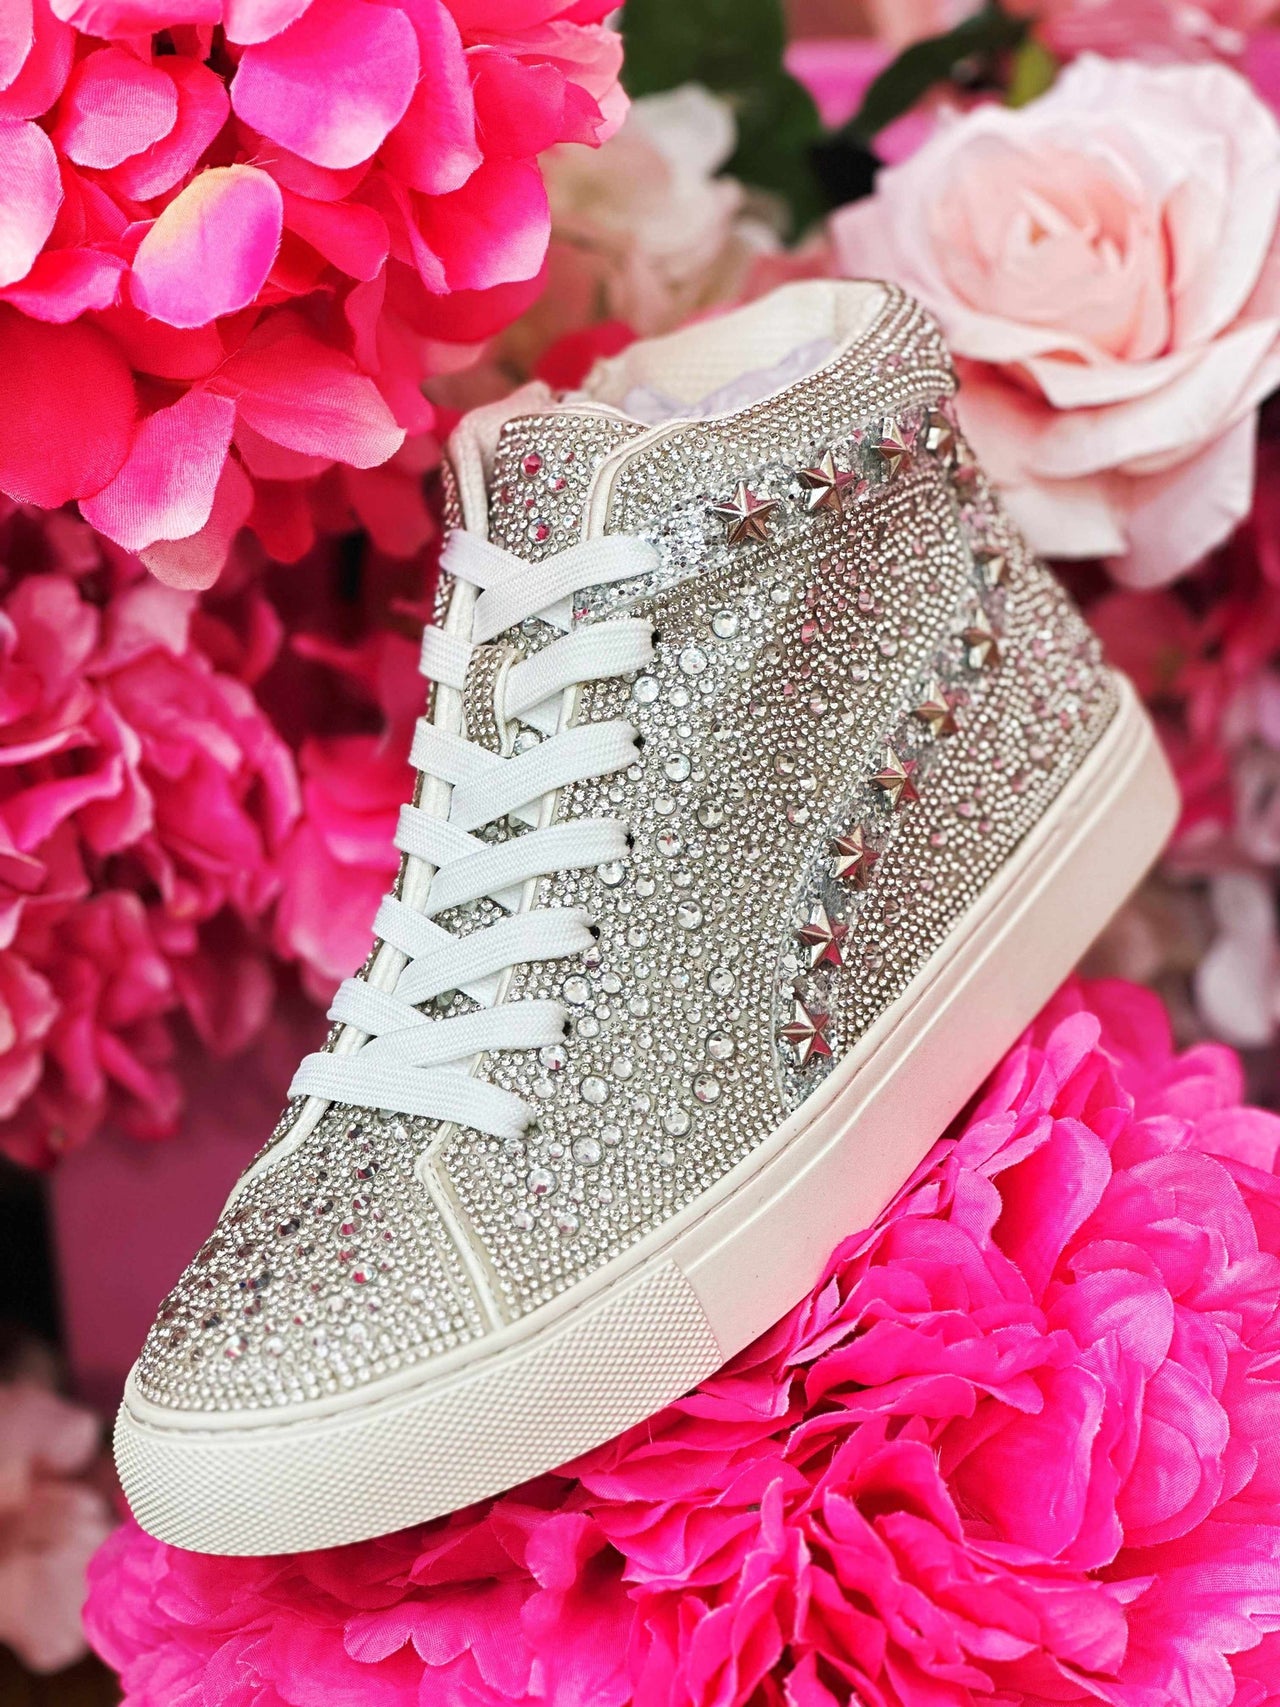 Buy Bridal Wedding Shoes Special Series Party Shoes With Silver Diamond  Stones Wedding Shoes Bridal Shoes A Super Shoe That Will Shine Online in  India - Etsy